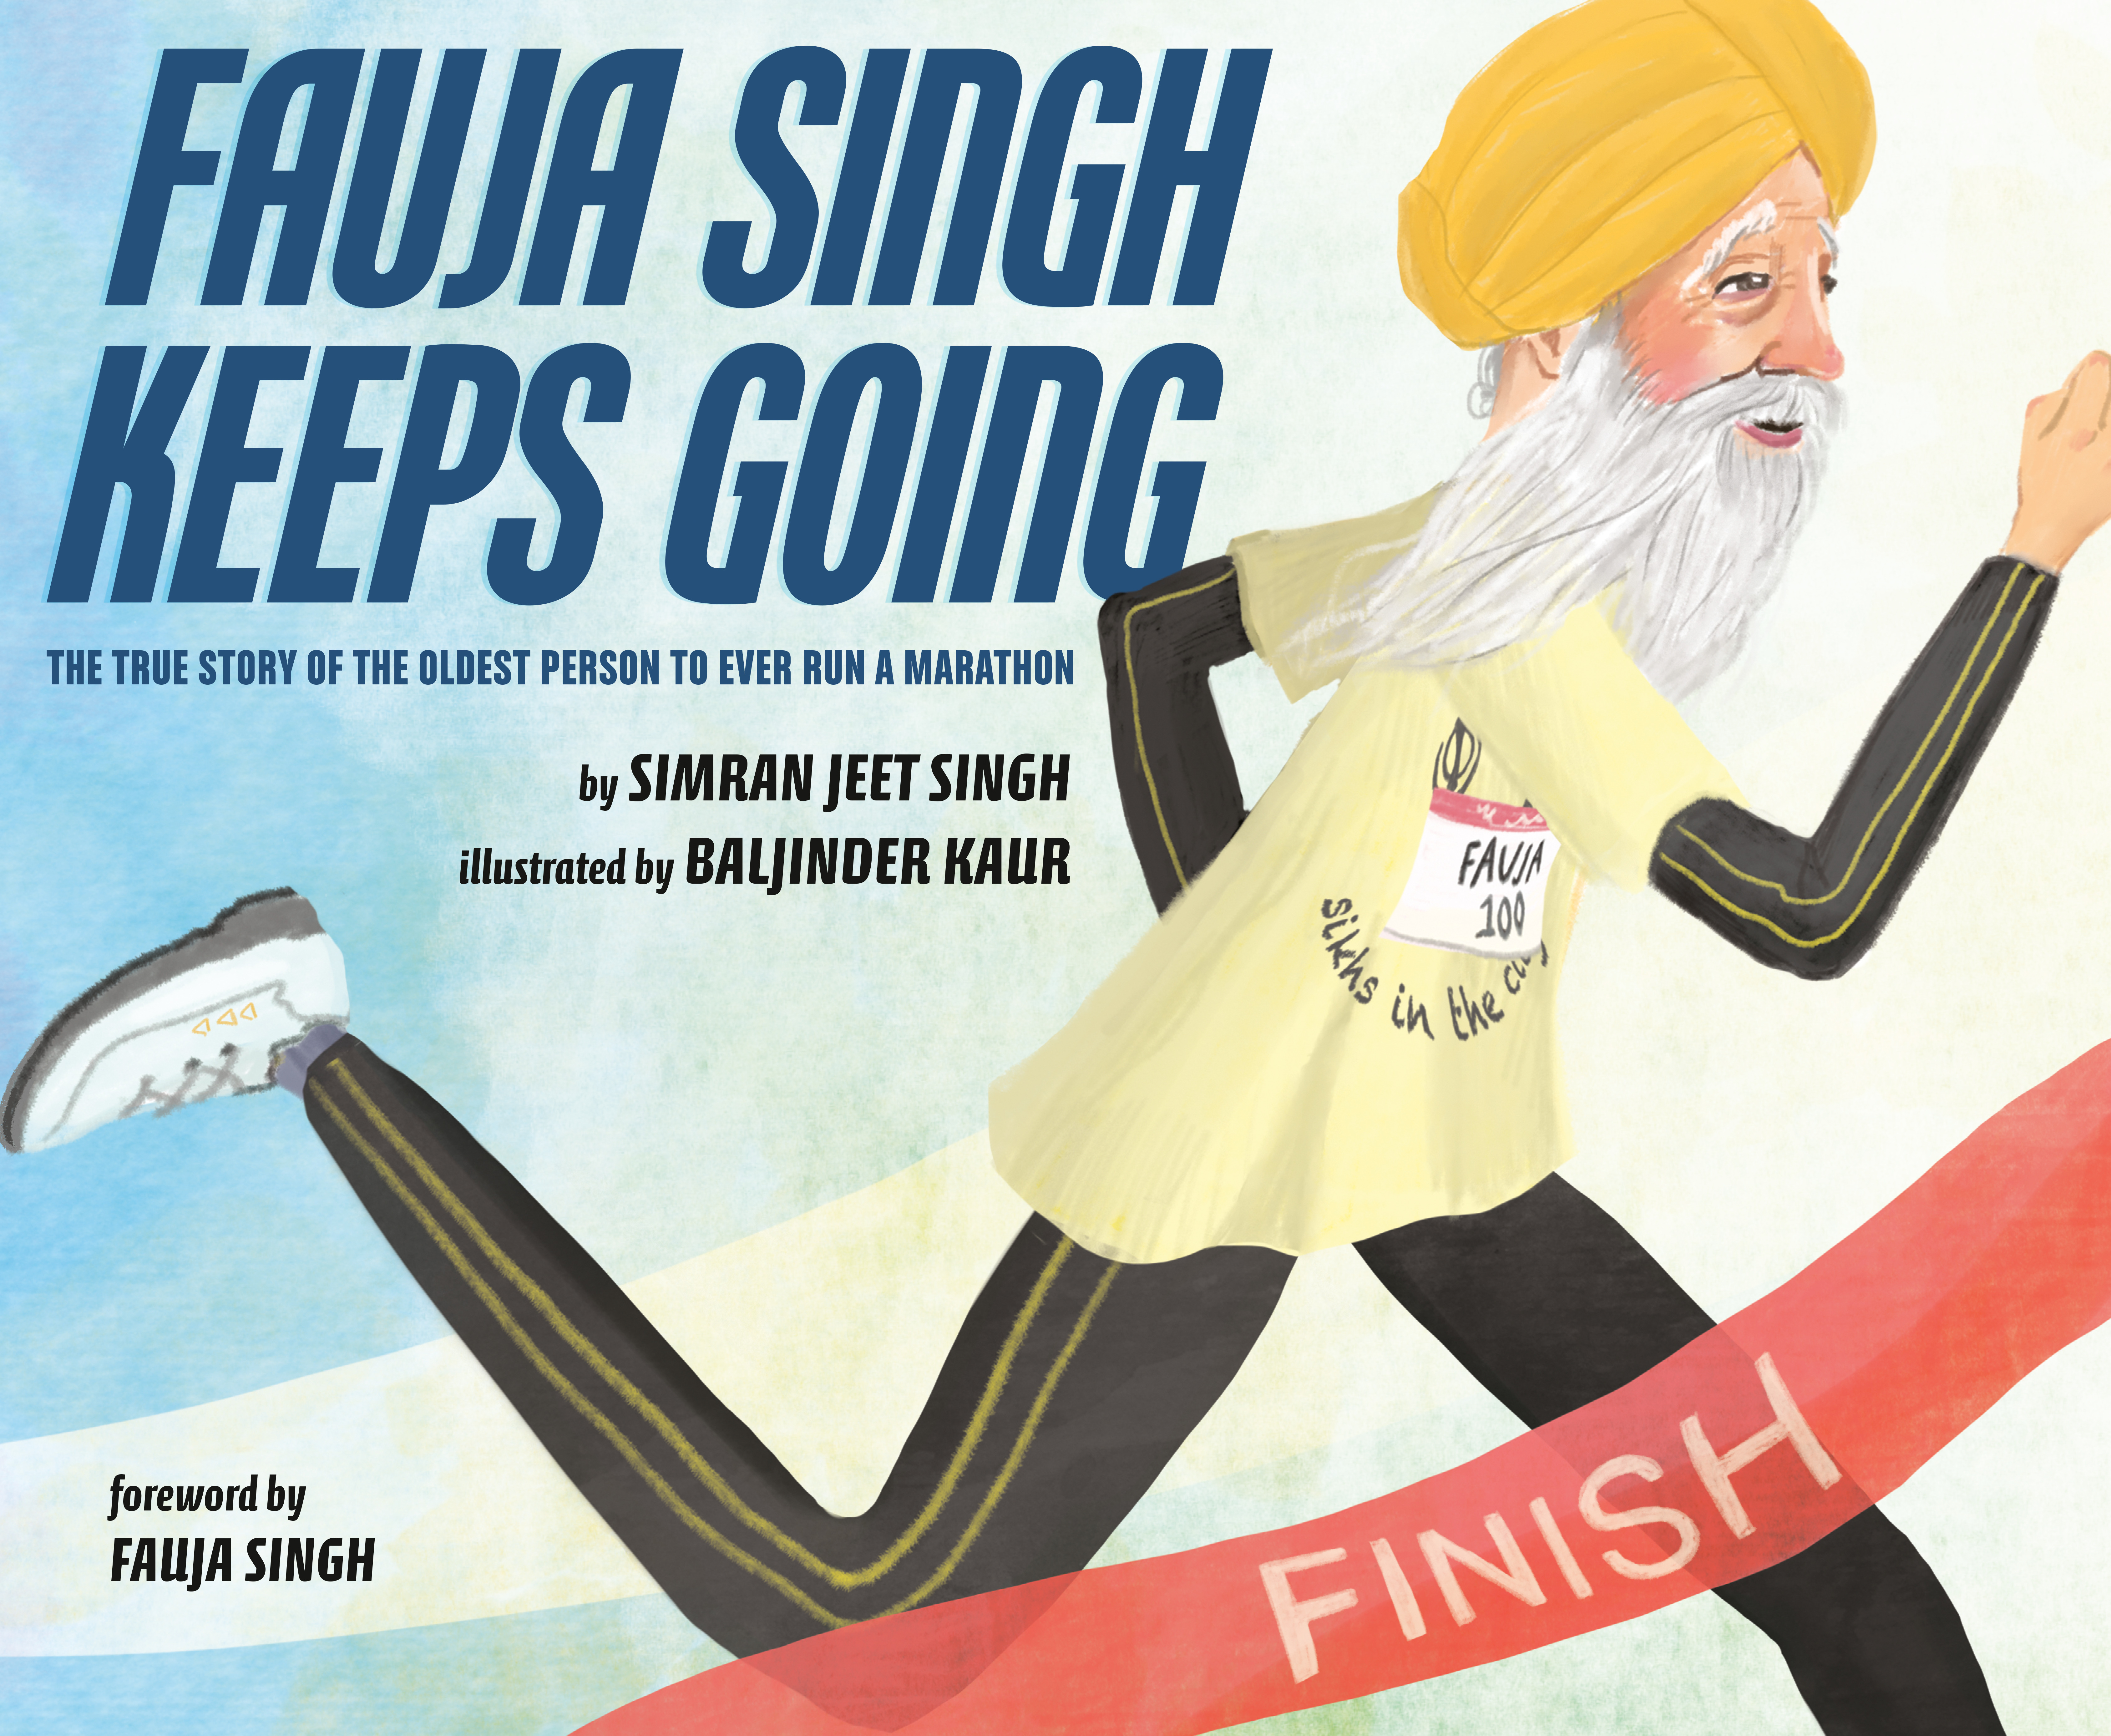 Fauja Singh Keeps Going : The True Story of the Oldest Person to Ever Run a Marathon | Singh, Simran Jeet